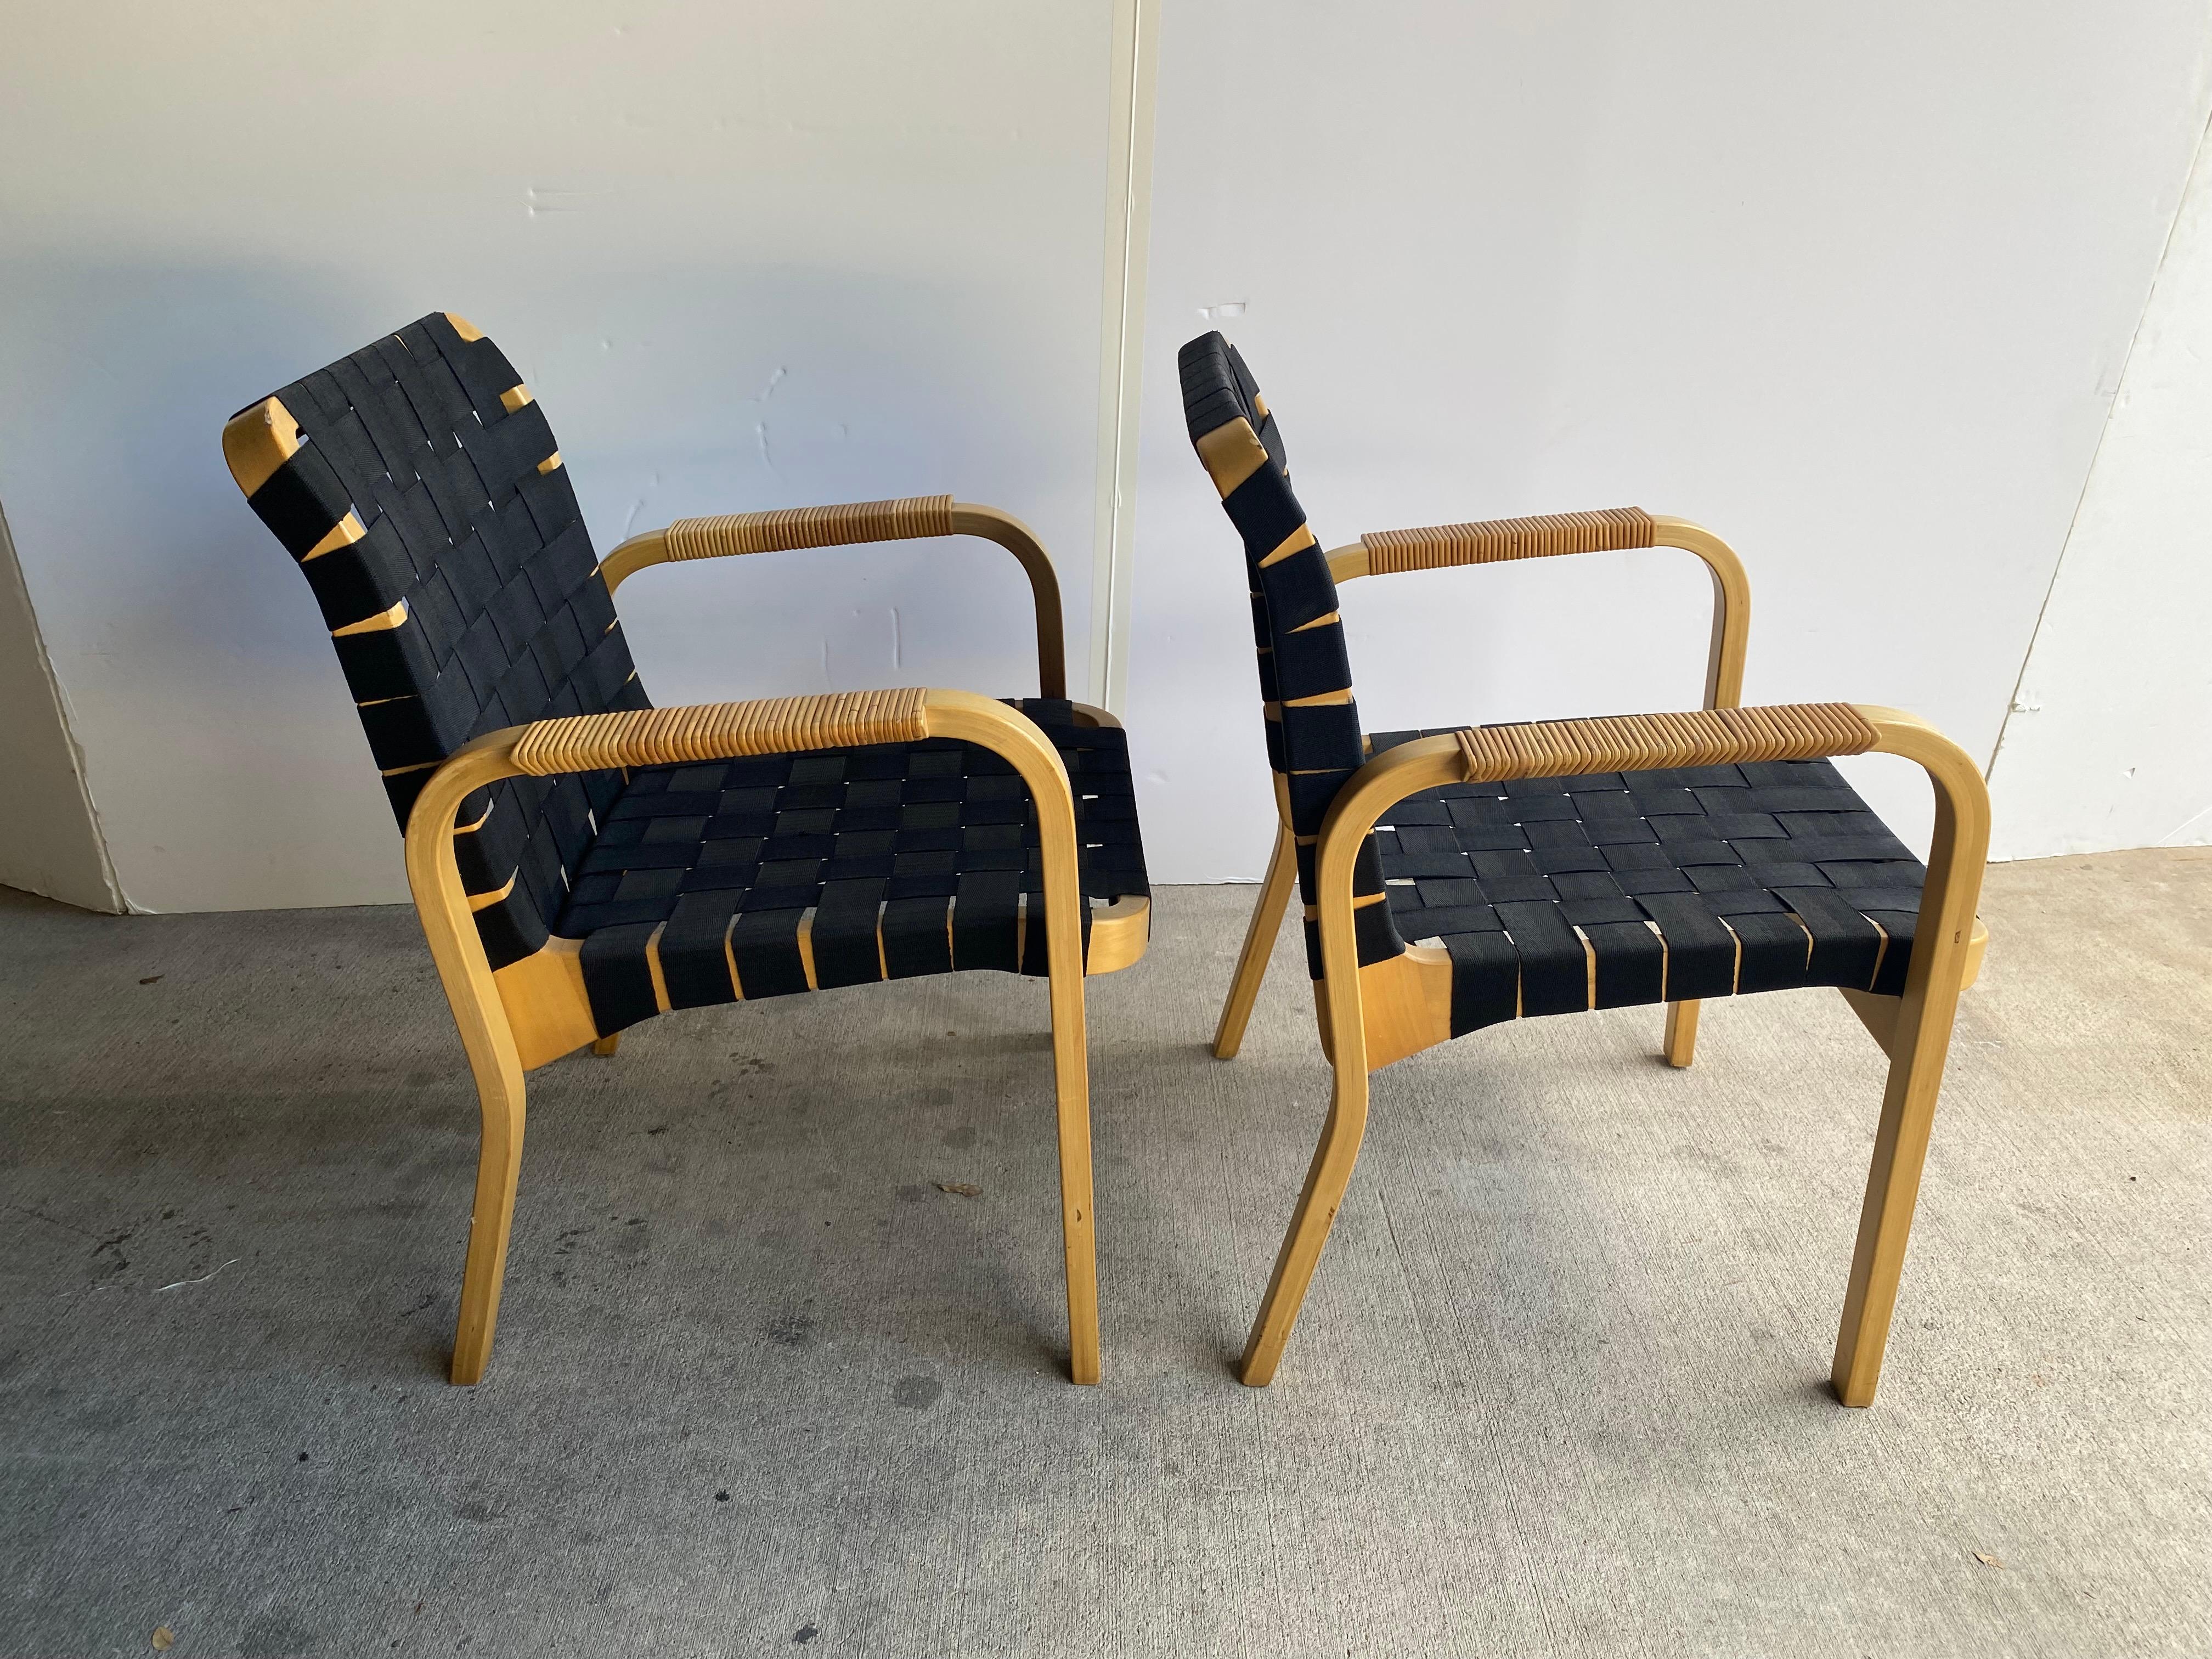 Finnish Alvar Aalto Armchairs with Black Straps, Finland, 1960's For Sale